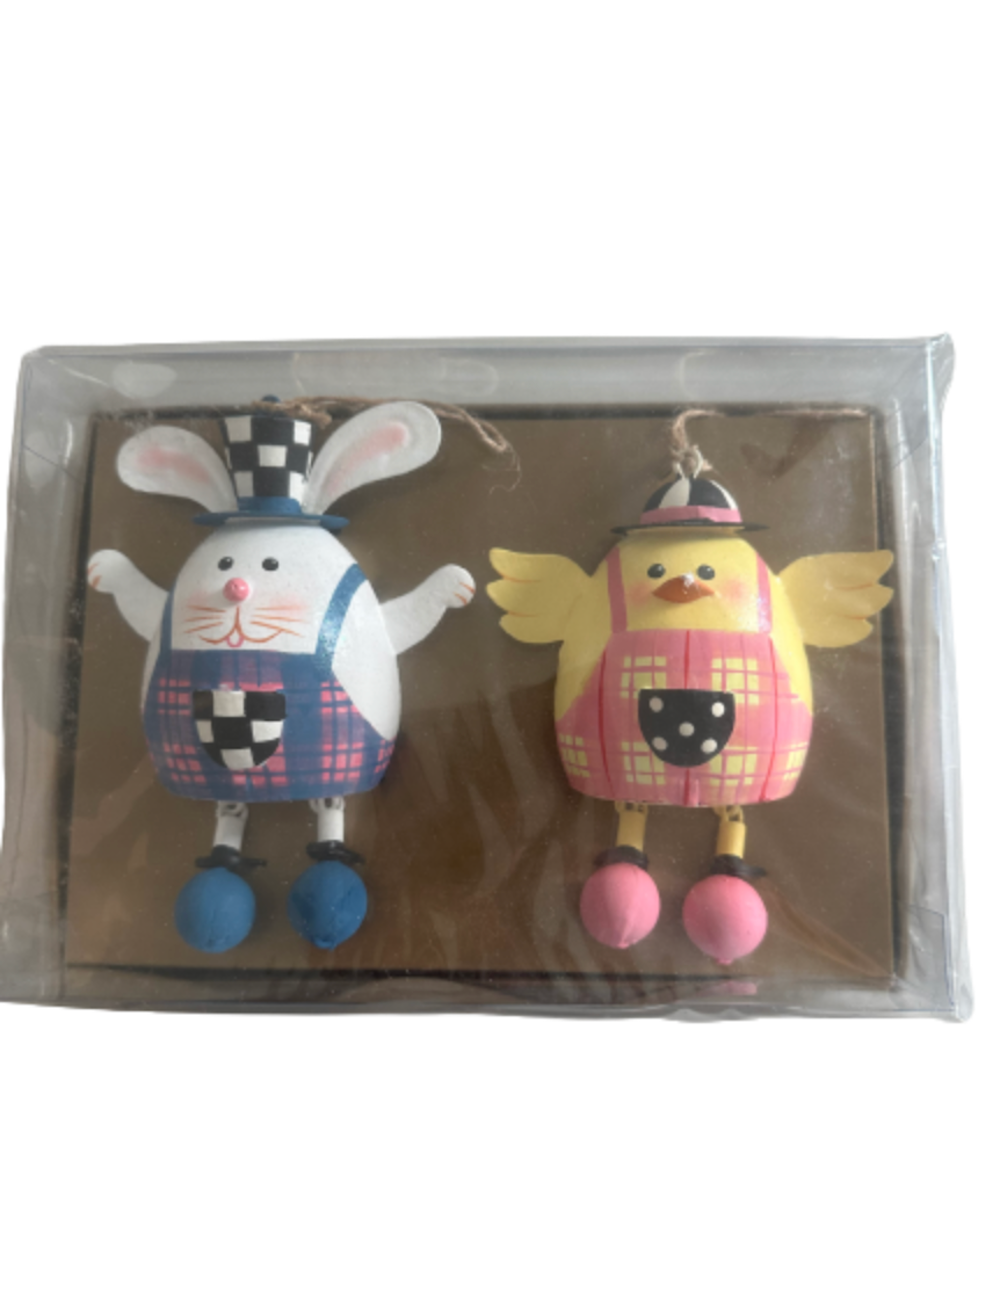 MacKenzie-Childs Easter Duo Ornaments Set of 2 Bunny and Chick New with Box